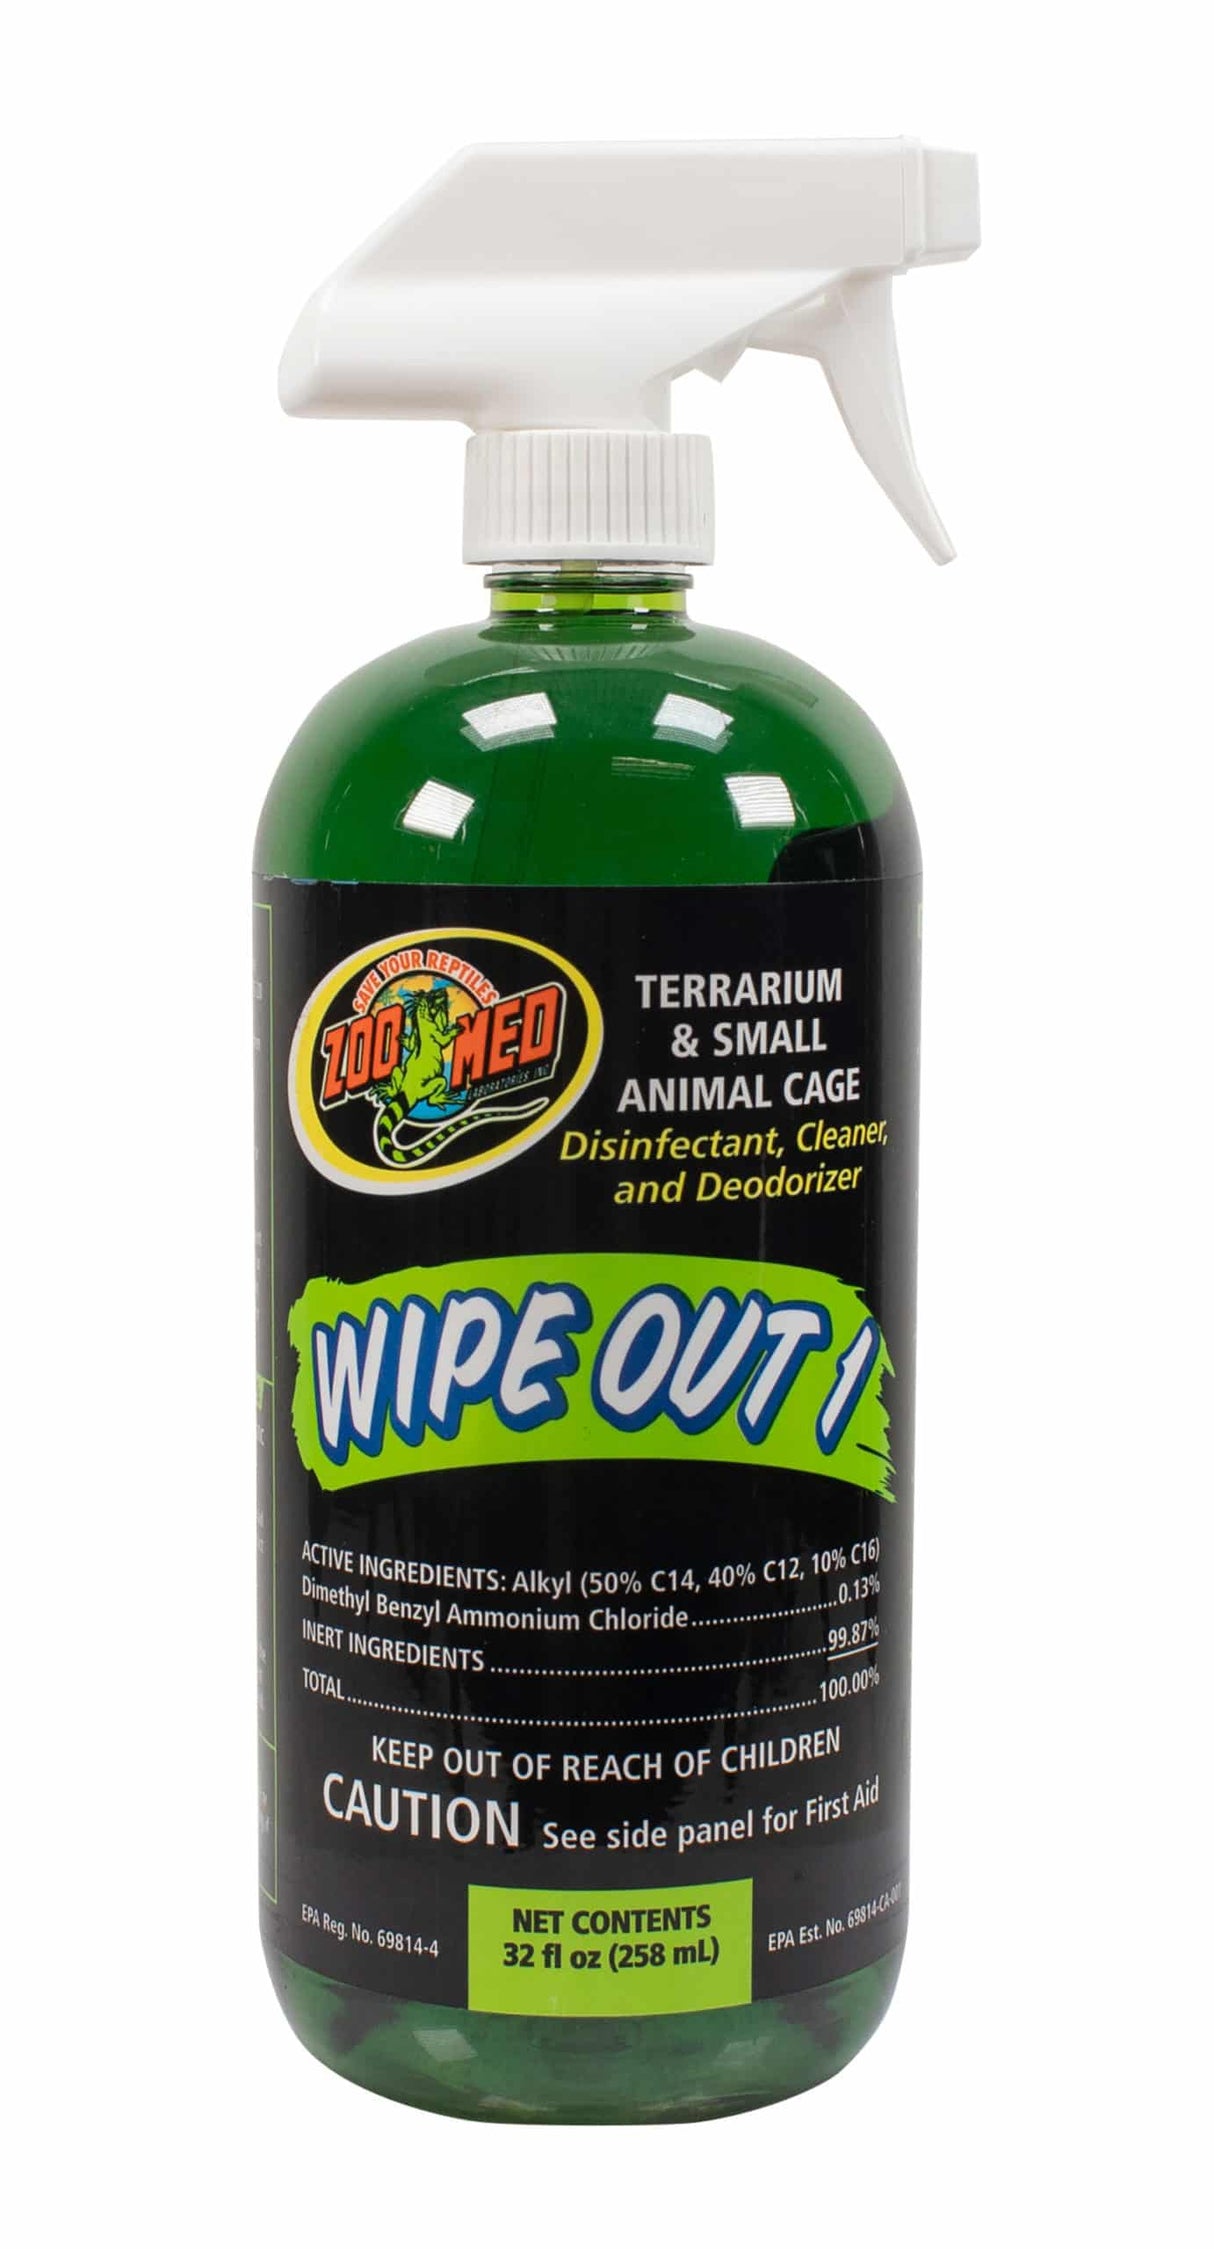 96 oz (3 x 32 oz) Zoo Med Wipe Out 1 Terrarium Cleaner, Disinfectant and Deodorizer